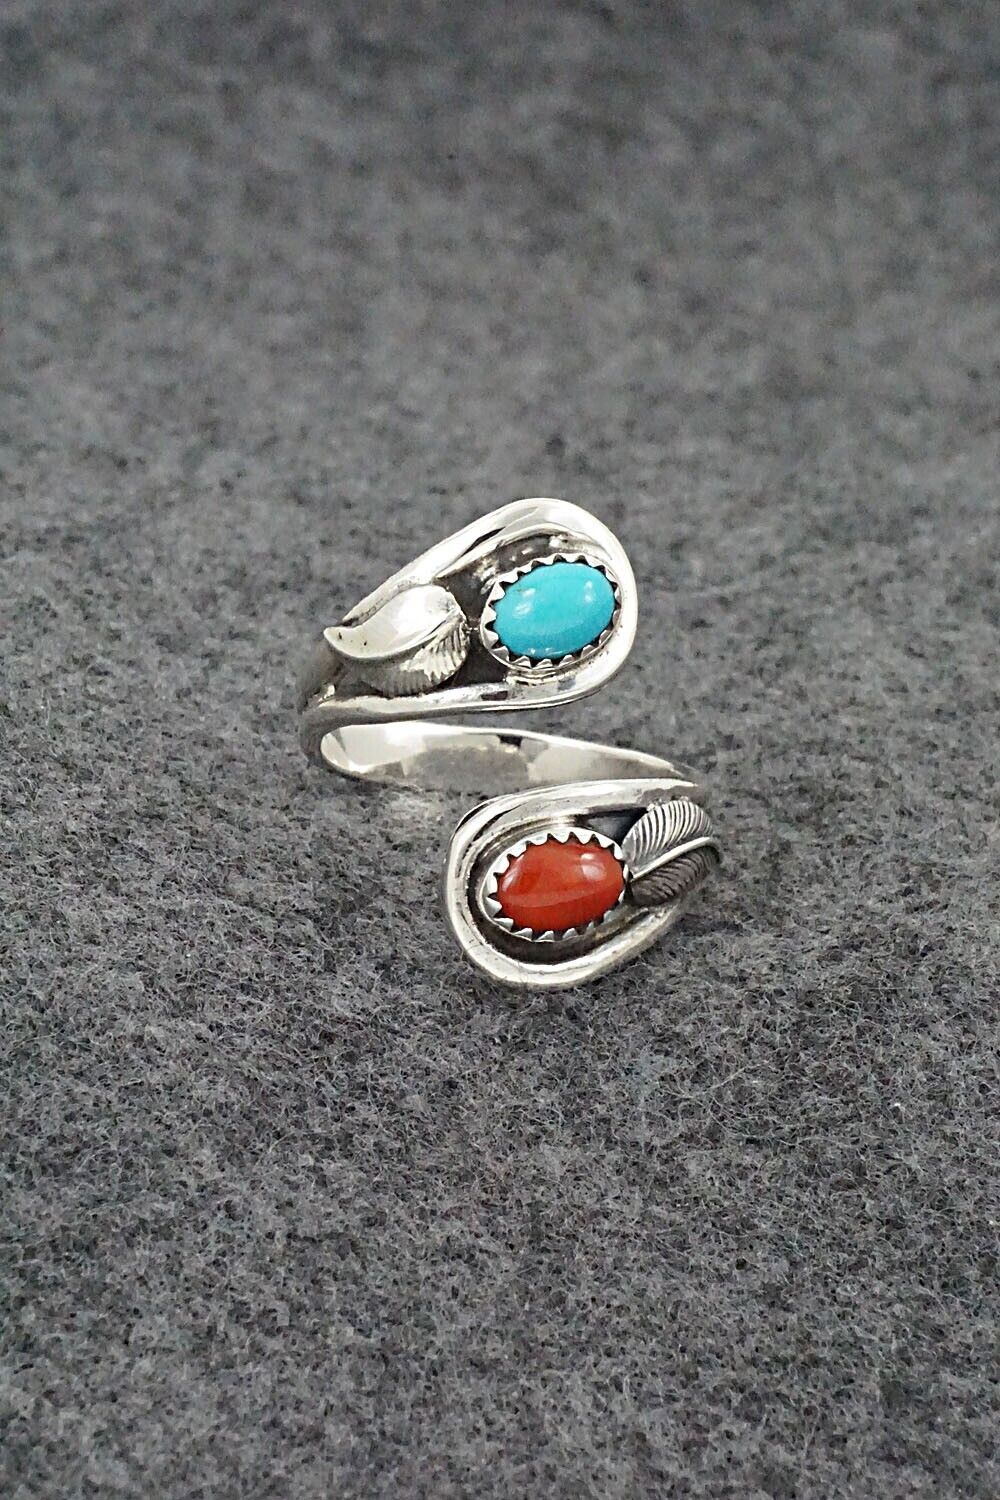 Turquoise, Coral & Sterling Silver Ring - Angela Platero - Size 9.5